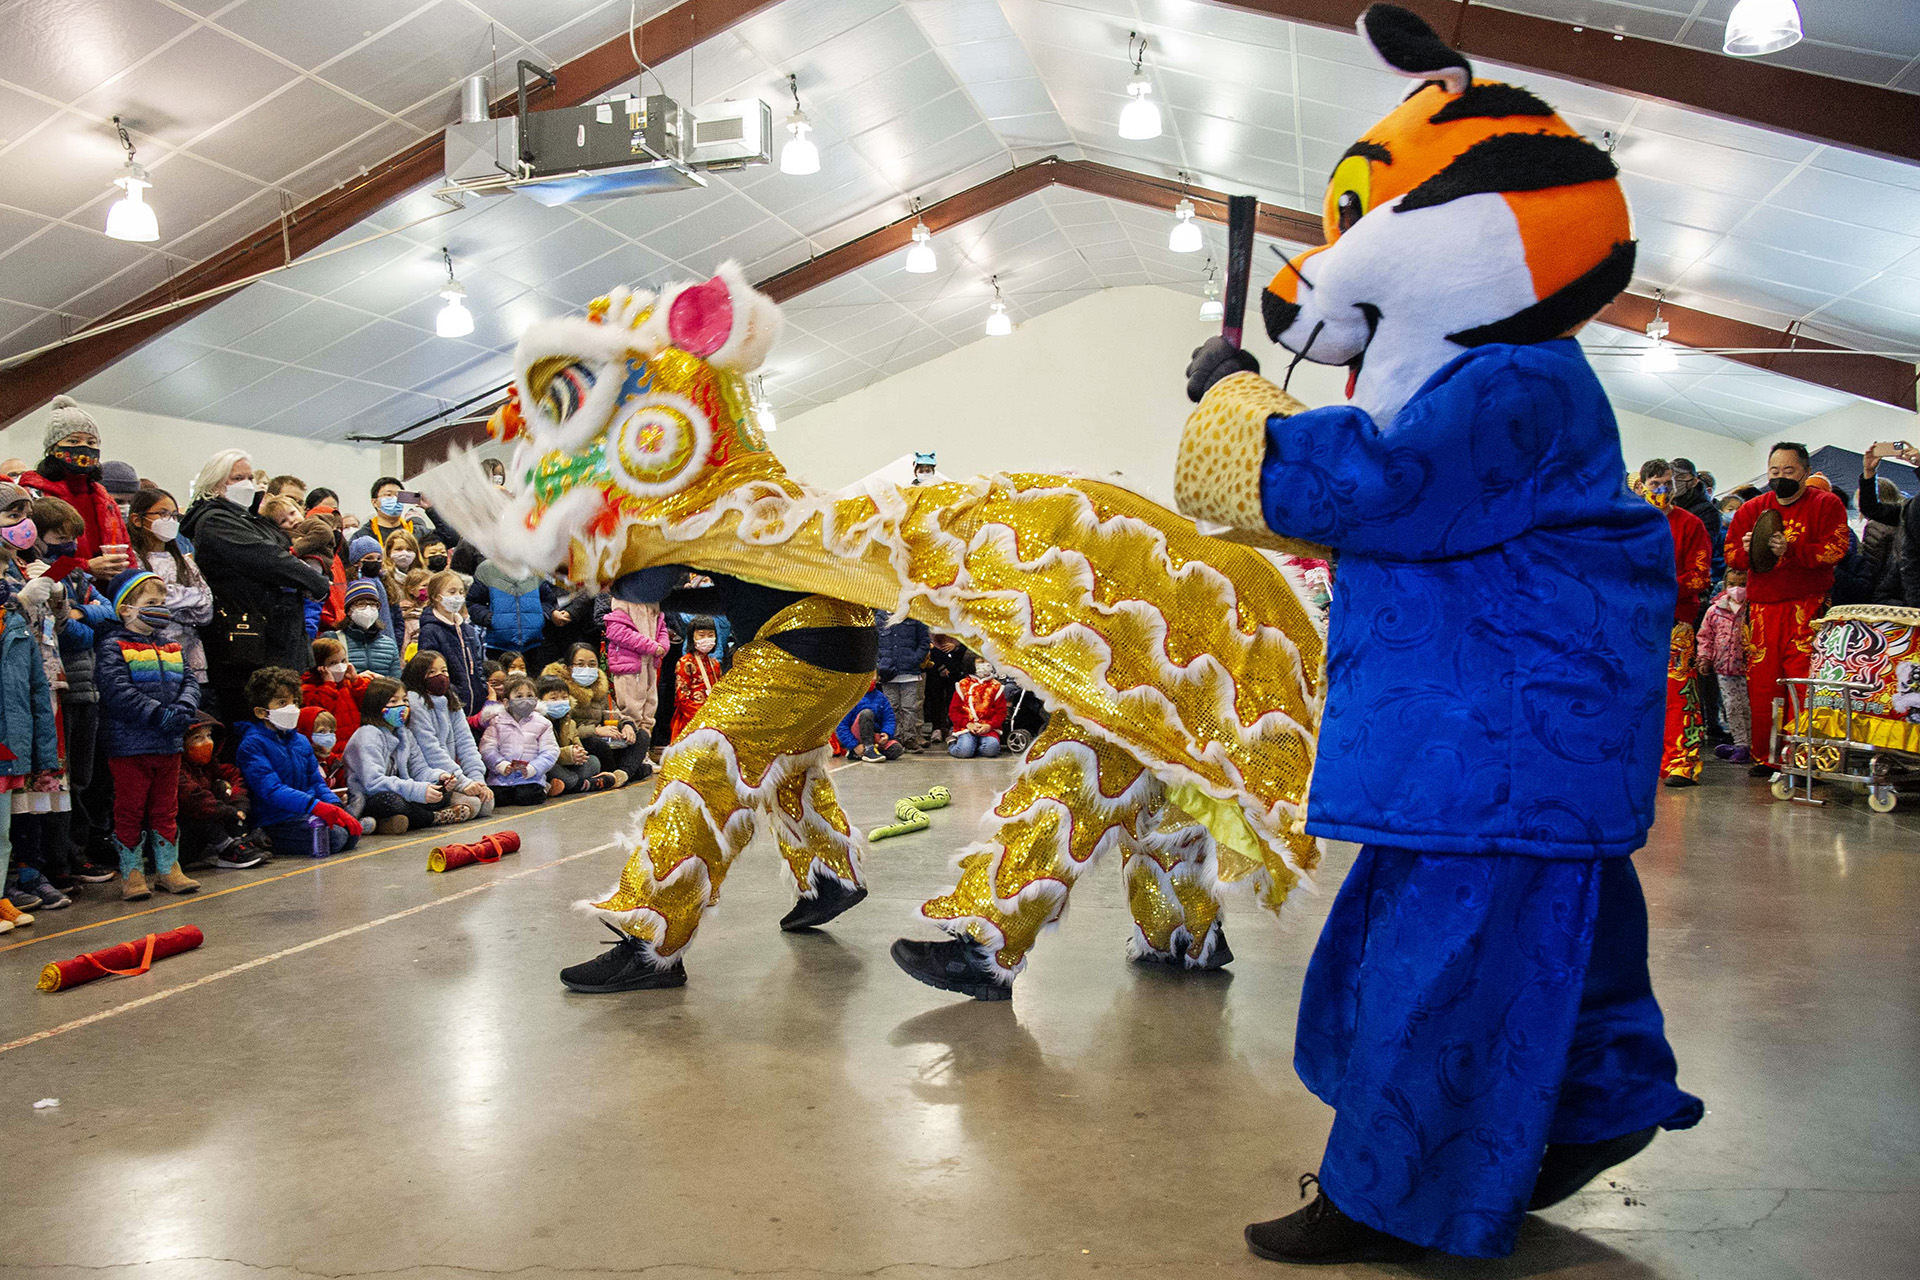 Chein Hong School of Kung Fu performs a Lion Dance during the Lunar New Year Celebration at Legacy Park in Decatur on Saturday, Jan. 29. 2022. Photo by Dean Hesse.